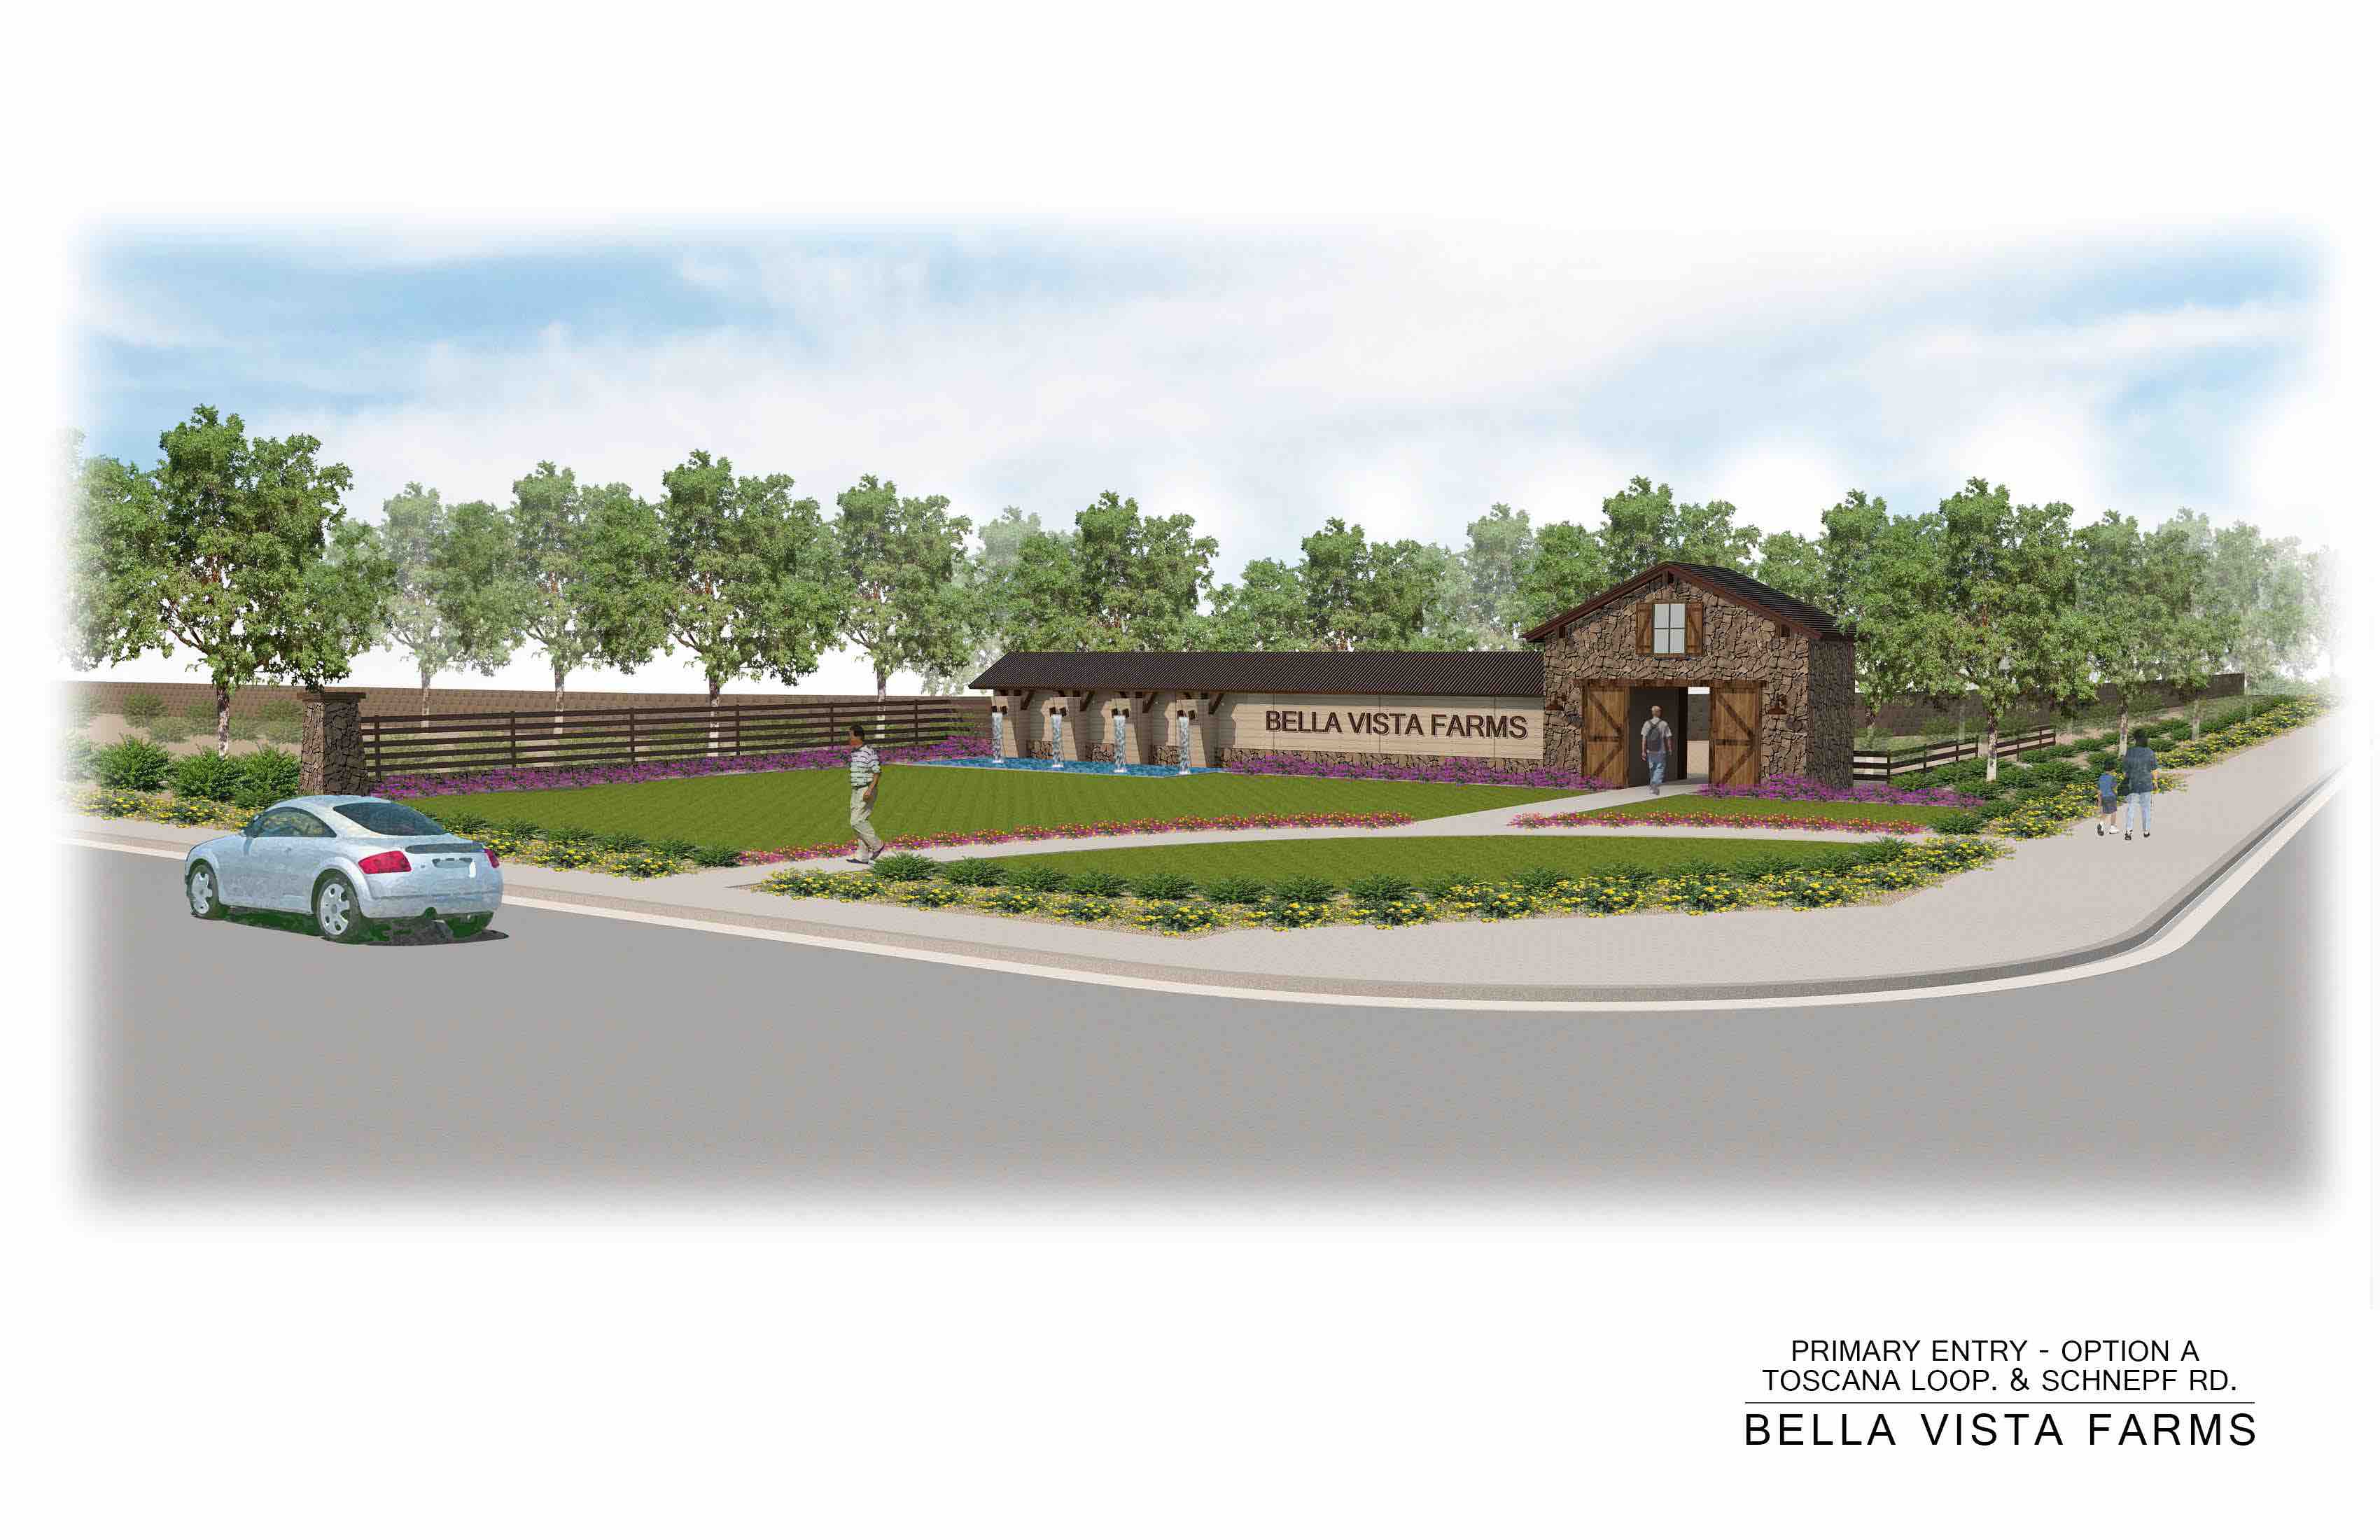 Homes New San Construction Builder Bella Homes Farms and on at Tan Kicks-off Magazine Vista Developer in Pointe Tri the - Valley